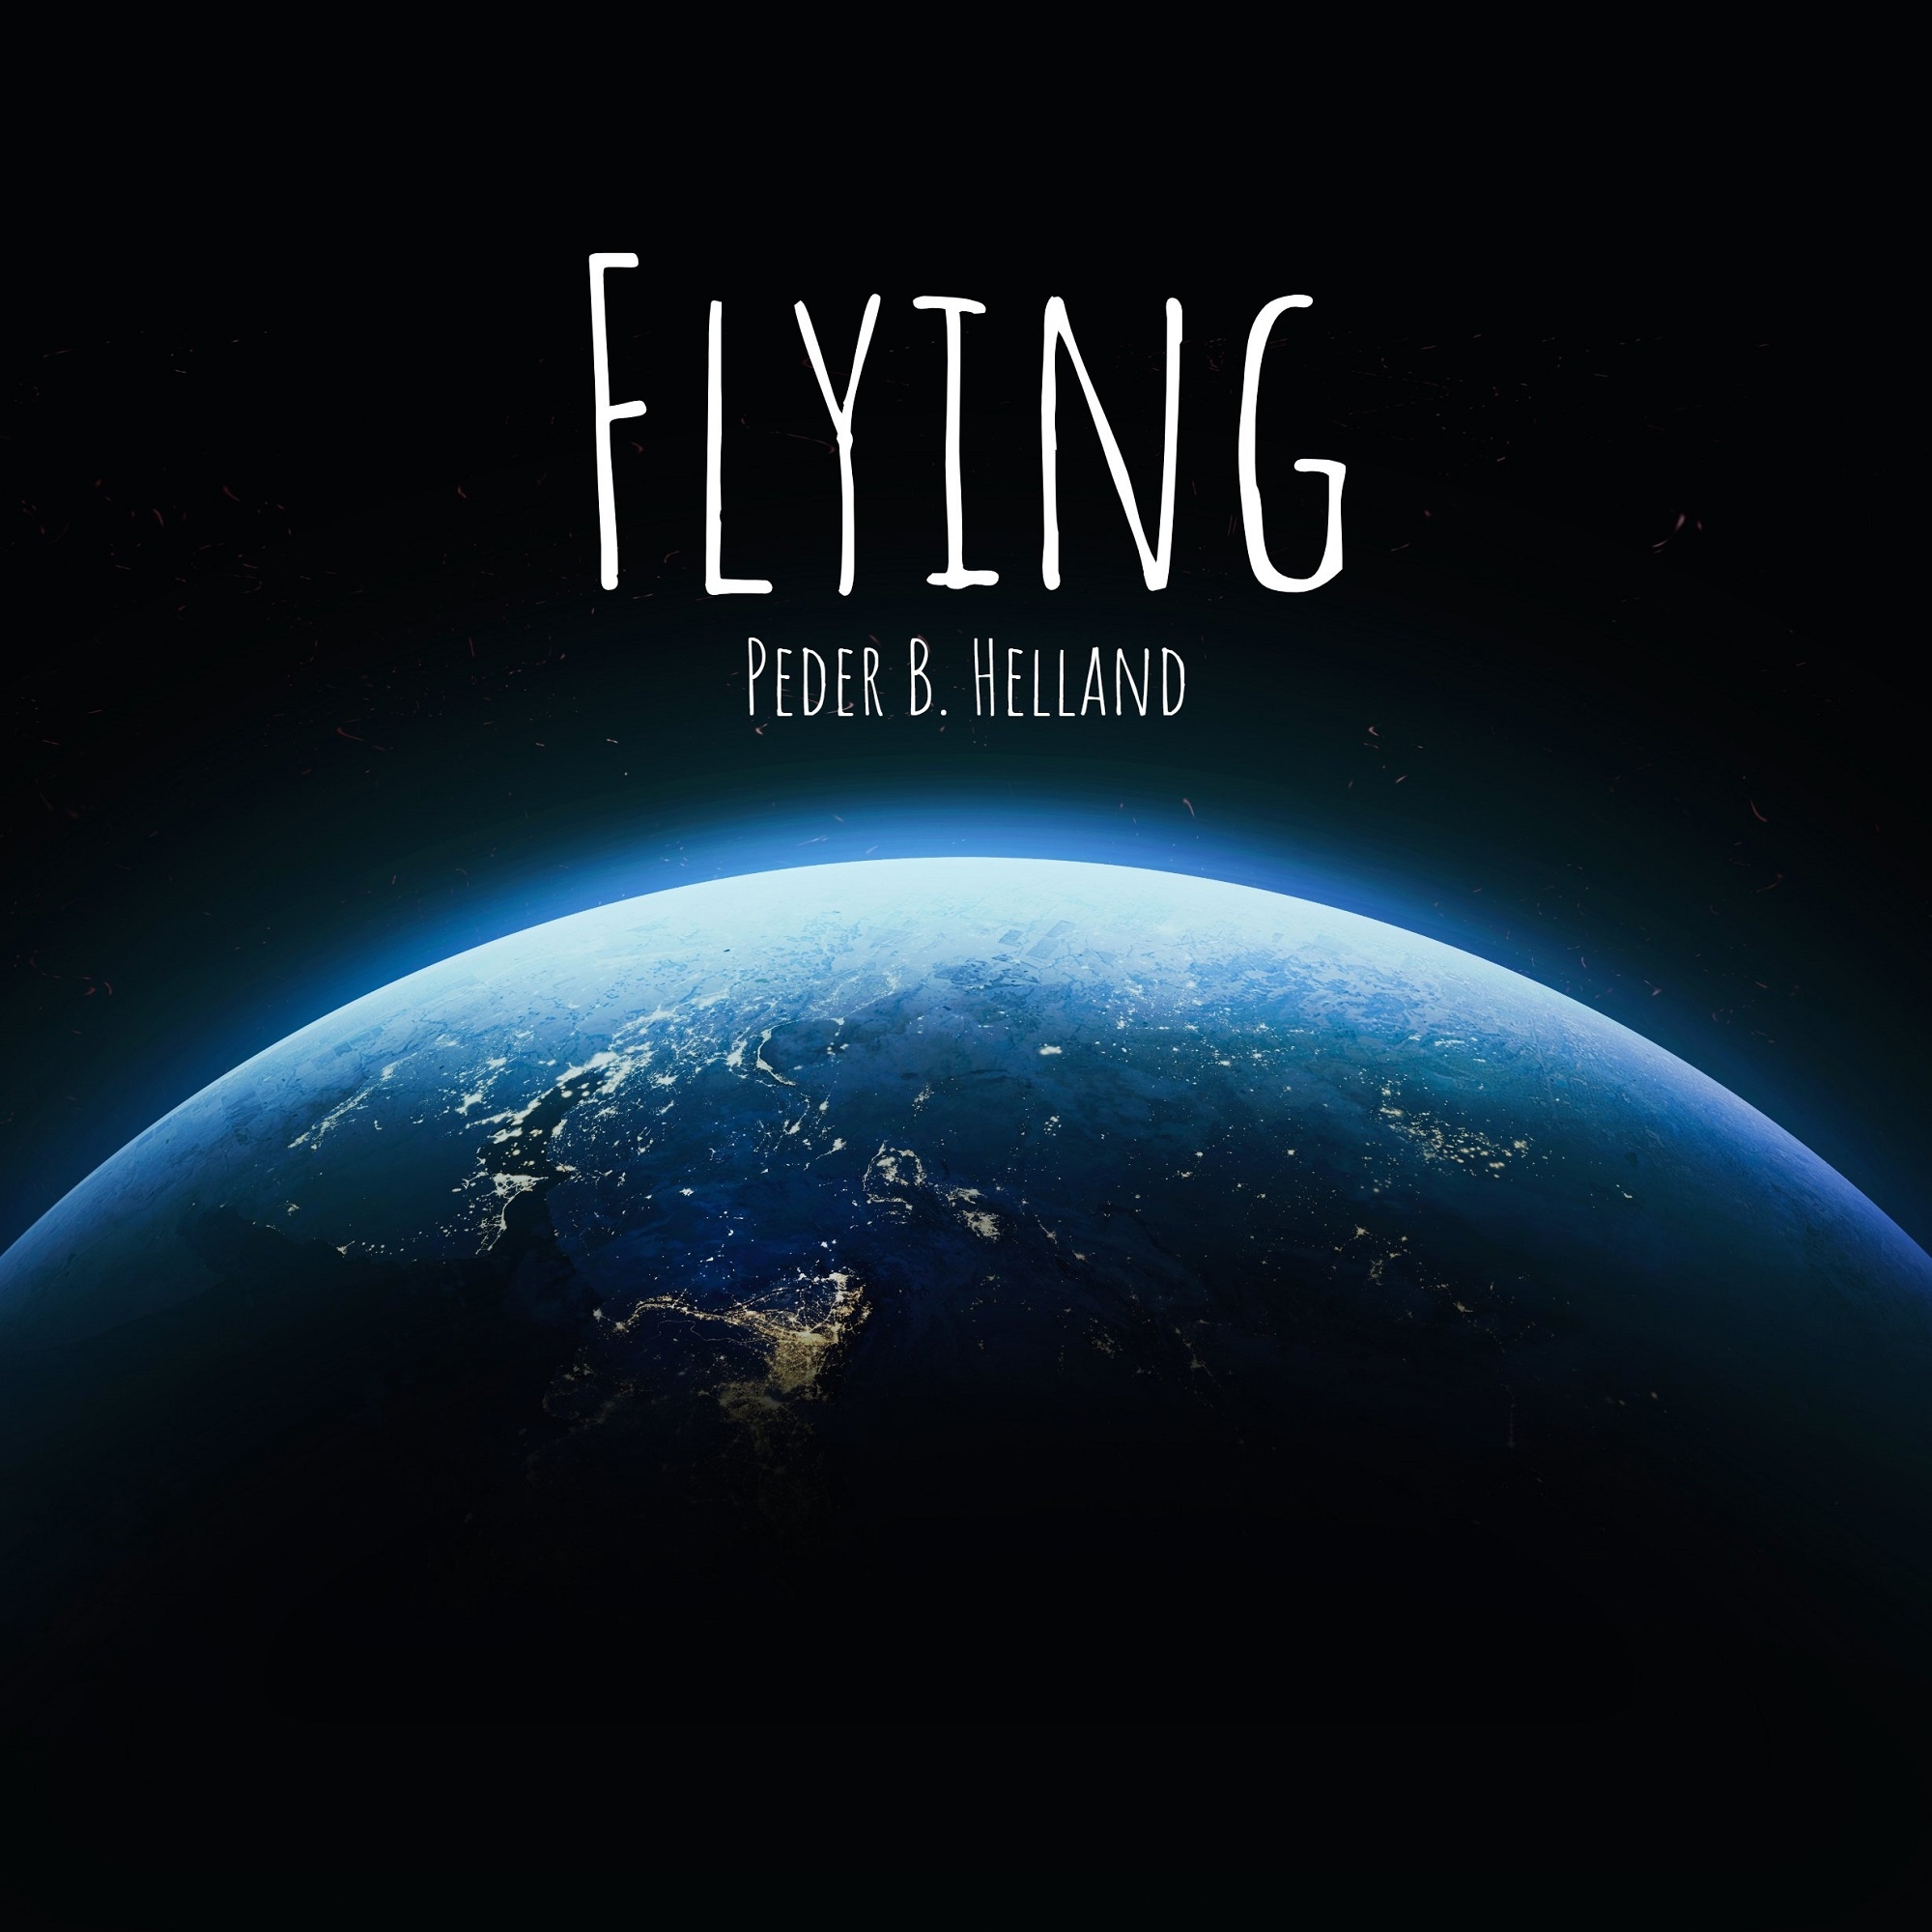 Cover art for the single Flying by Peder B. Helland